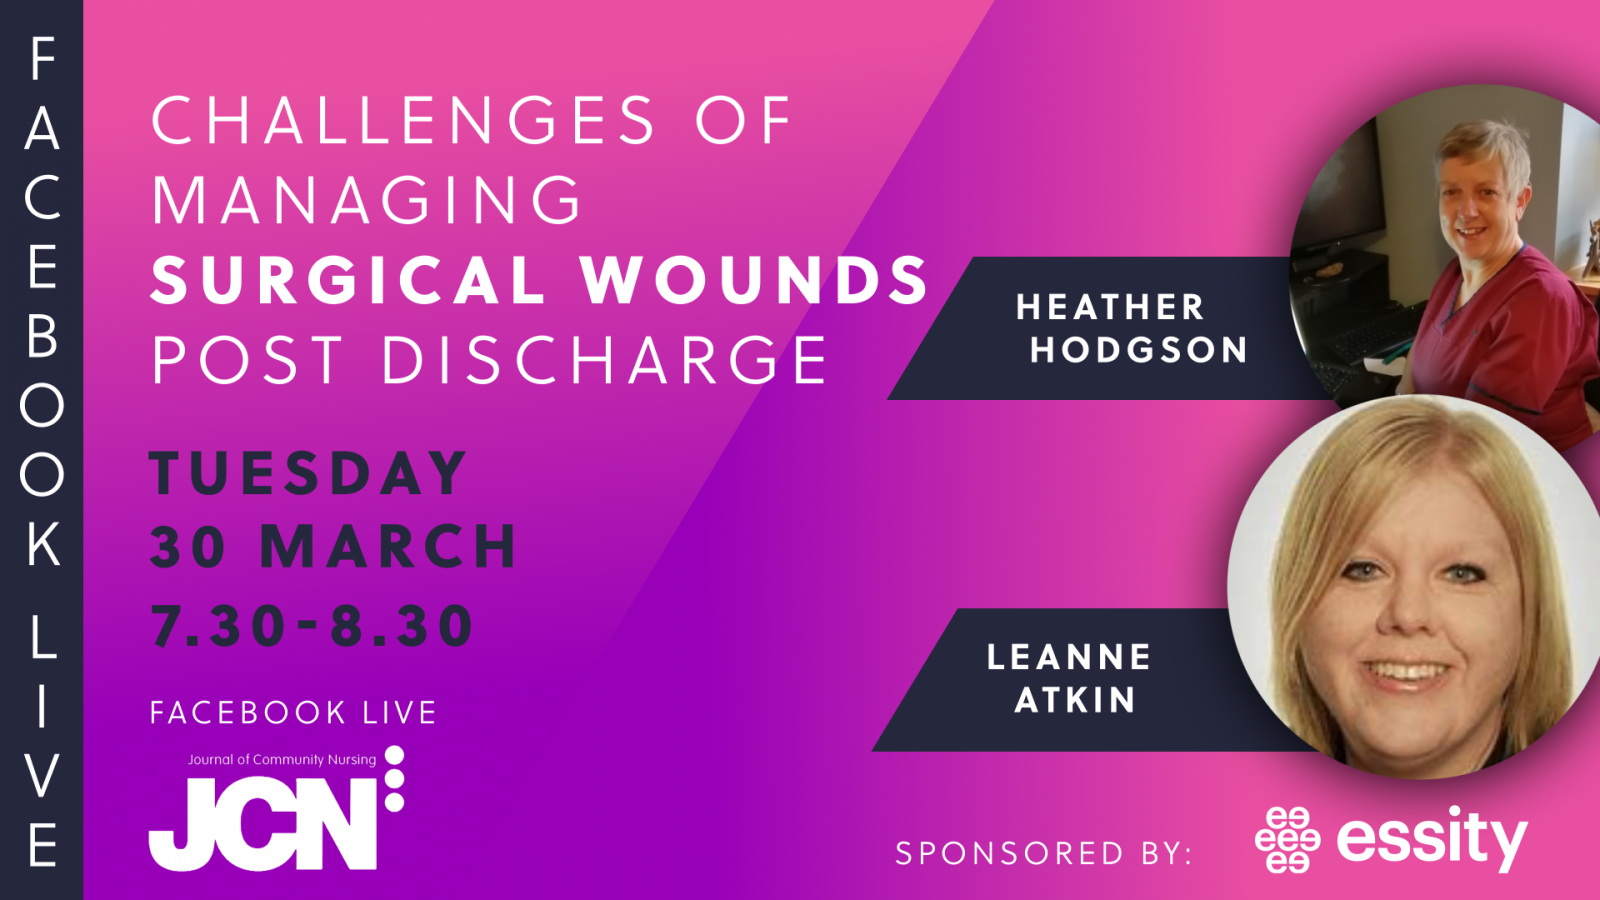 Facebook Live: Challenges of managing surgical wounds post discharge: Video